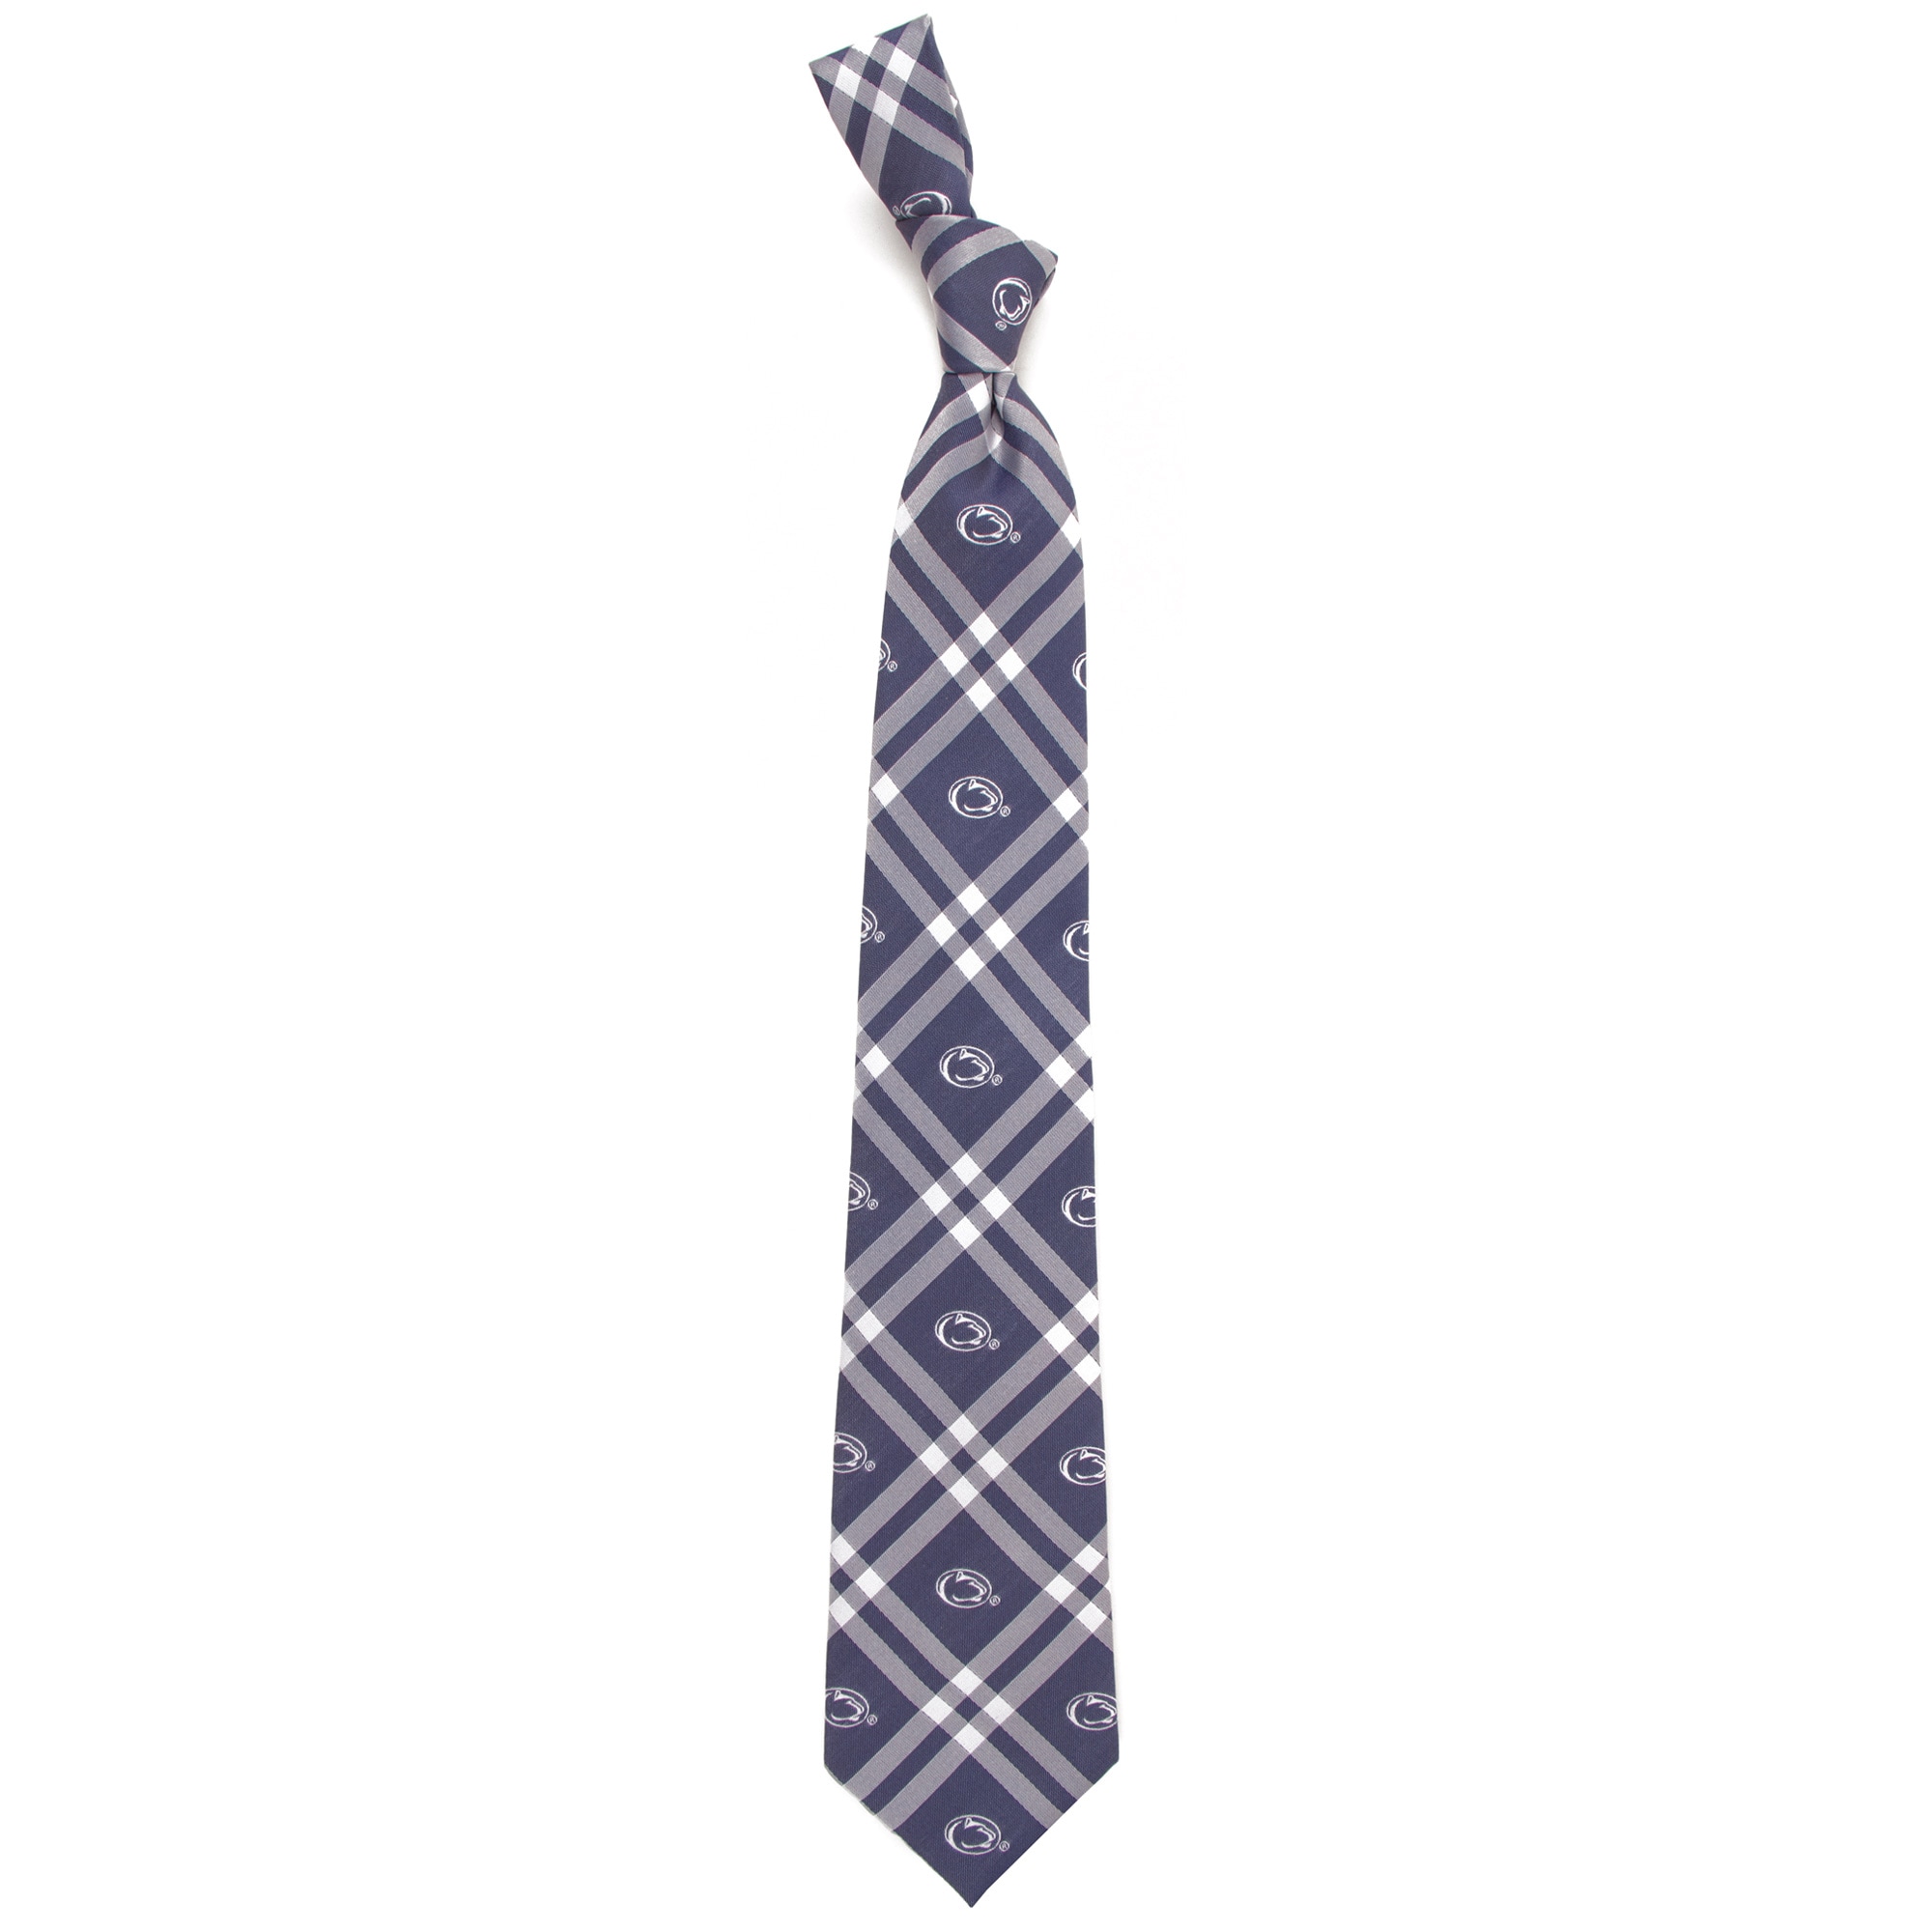 Men's Navy Penn State Nittany Lions Rhodes Tie - image 1 of 1